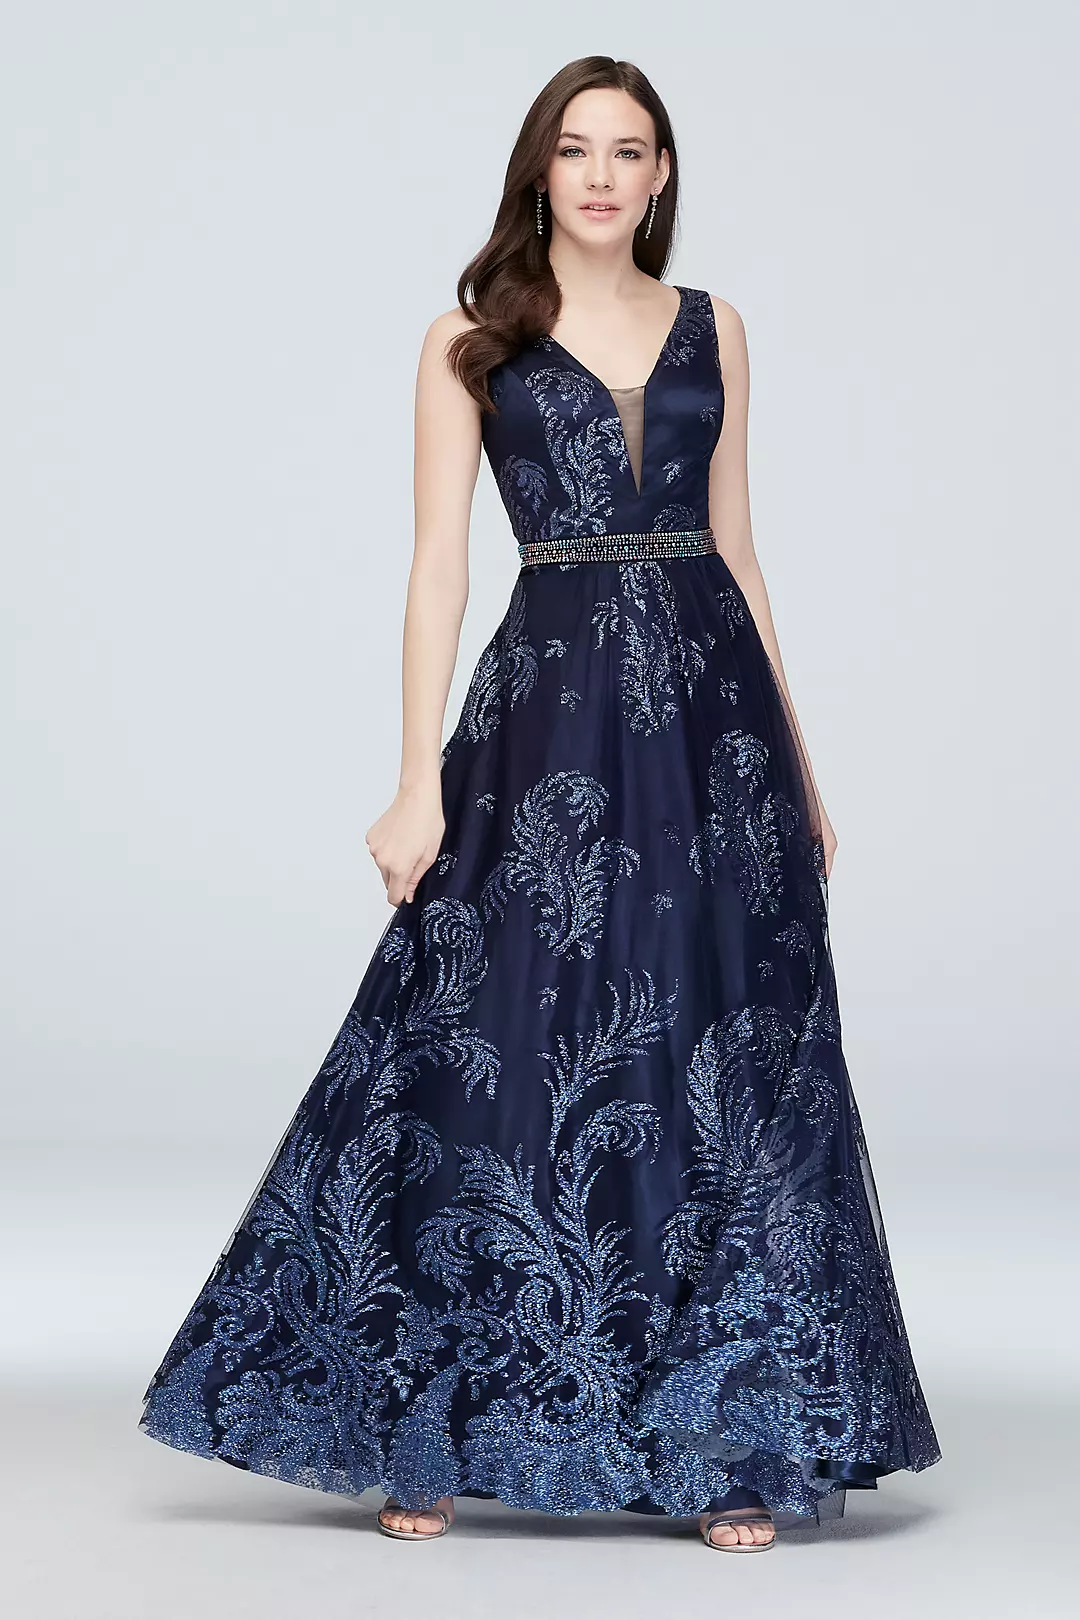 Belted Tulle Glitter Brocade Gown with Deep V-Neck Image